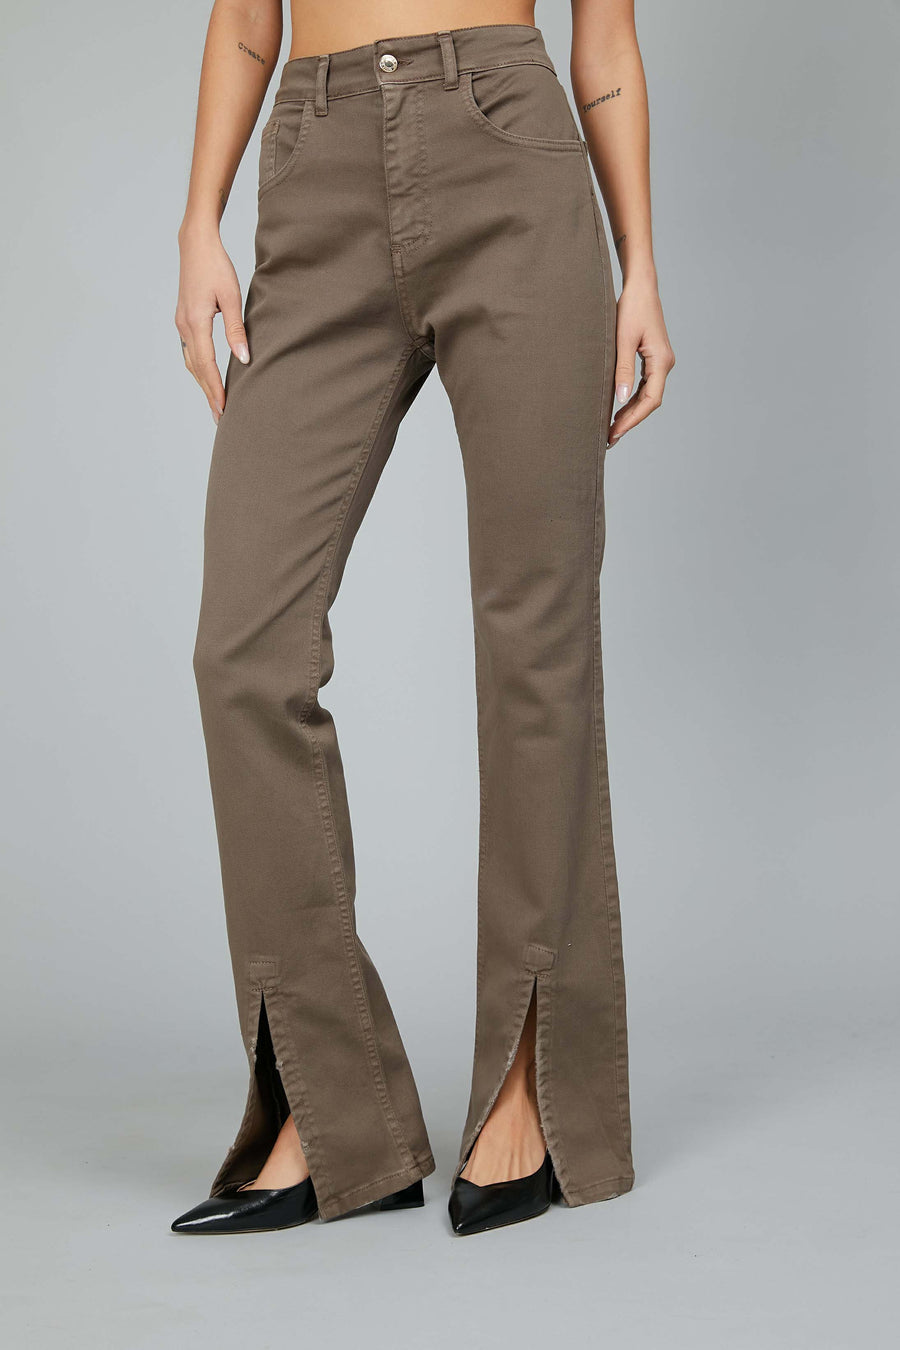 BROWN JEANS WITH SPLIT